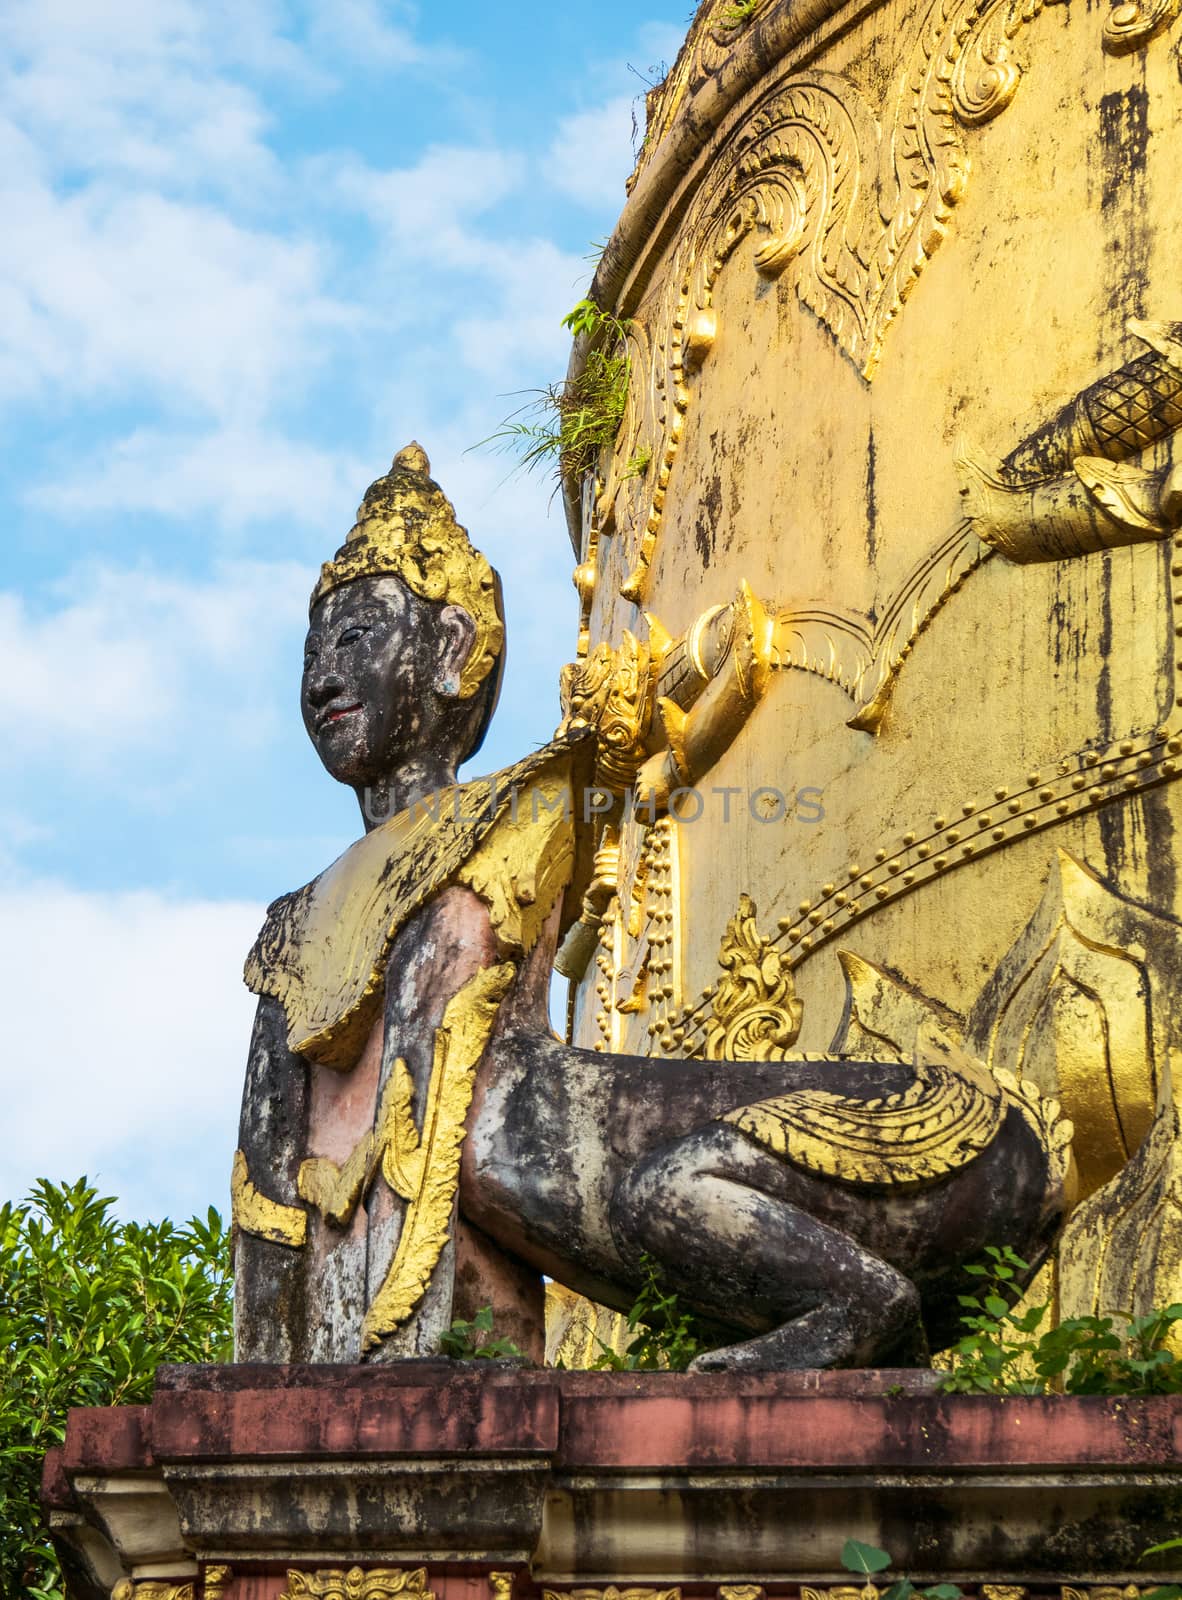 Detail of old pagoda at the Moe Hnying Monastery in Yangon, Myanmar. Sculpture of hybrid creature with human head and animal body in the foreground.